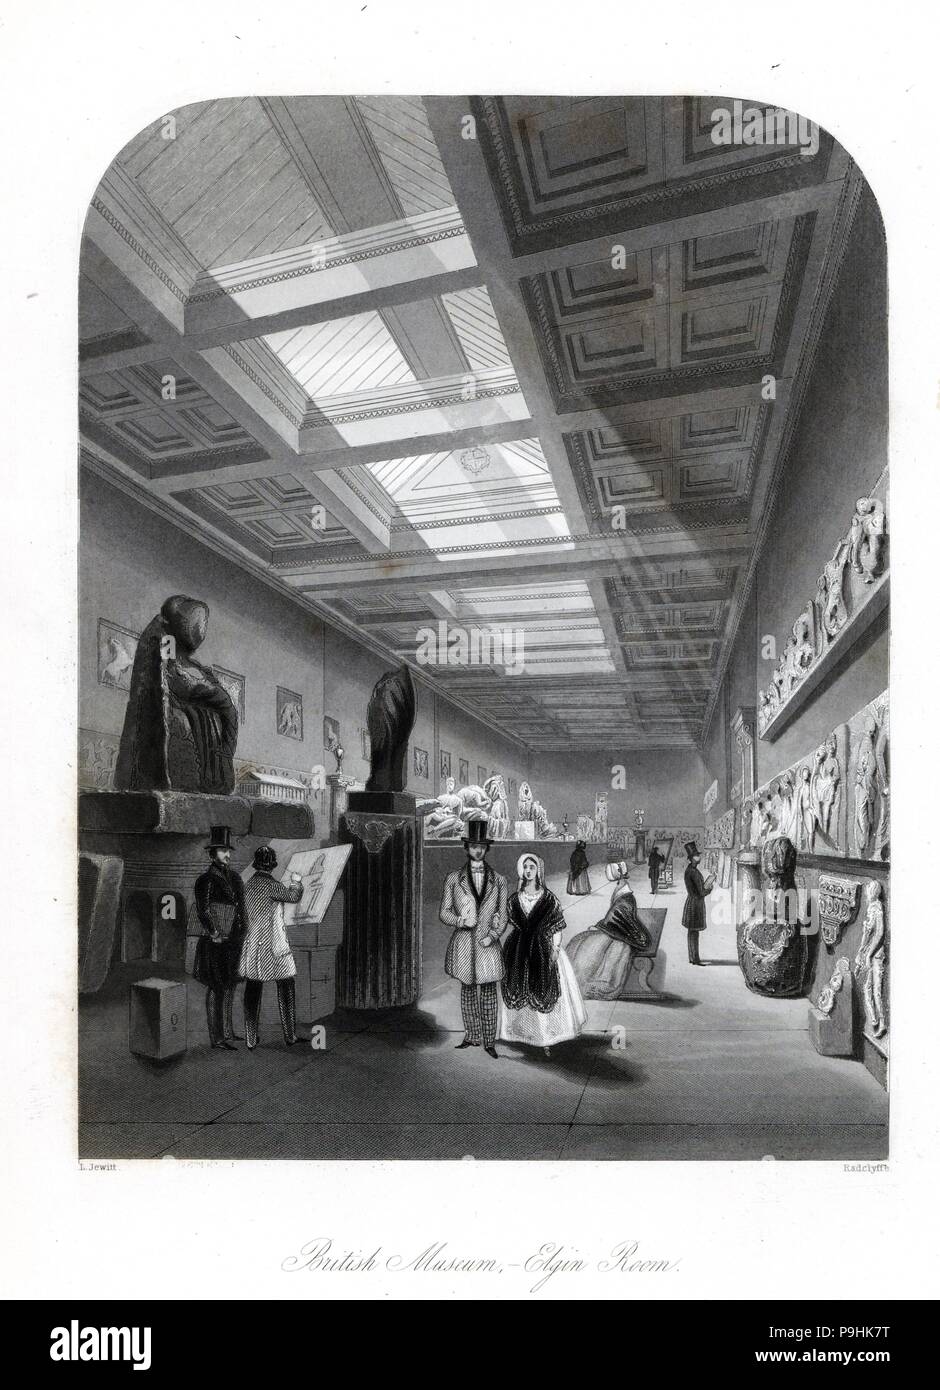 The Elgin Marbles room in the British Museum. Lord Elgin's collection of perished statuary from the Parthenon was purchased by the British government in 1816. Steel engraving by Radclyffe after an illustration by Llewellyn Jewitt from London Interiors, Their Costumes and Ceremonies, Joshua Mead, London, 1841. Stock Photo